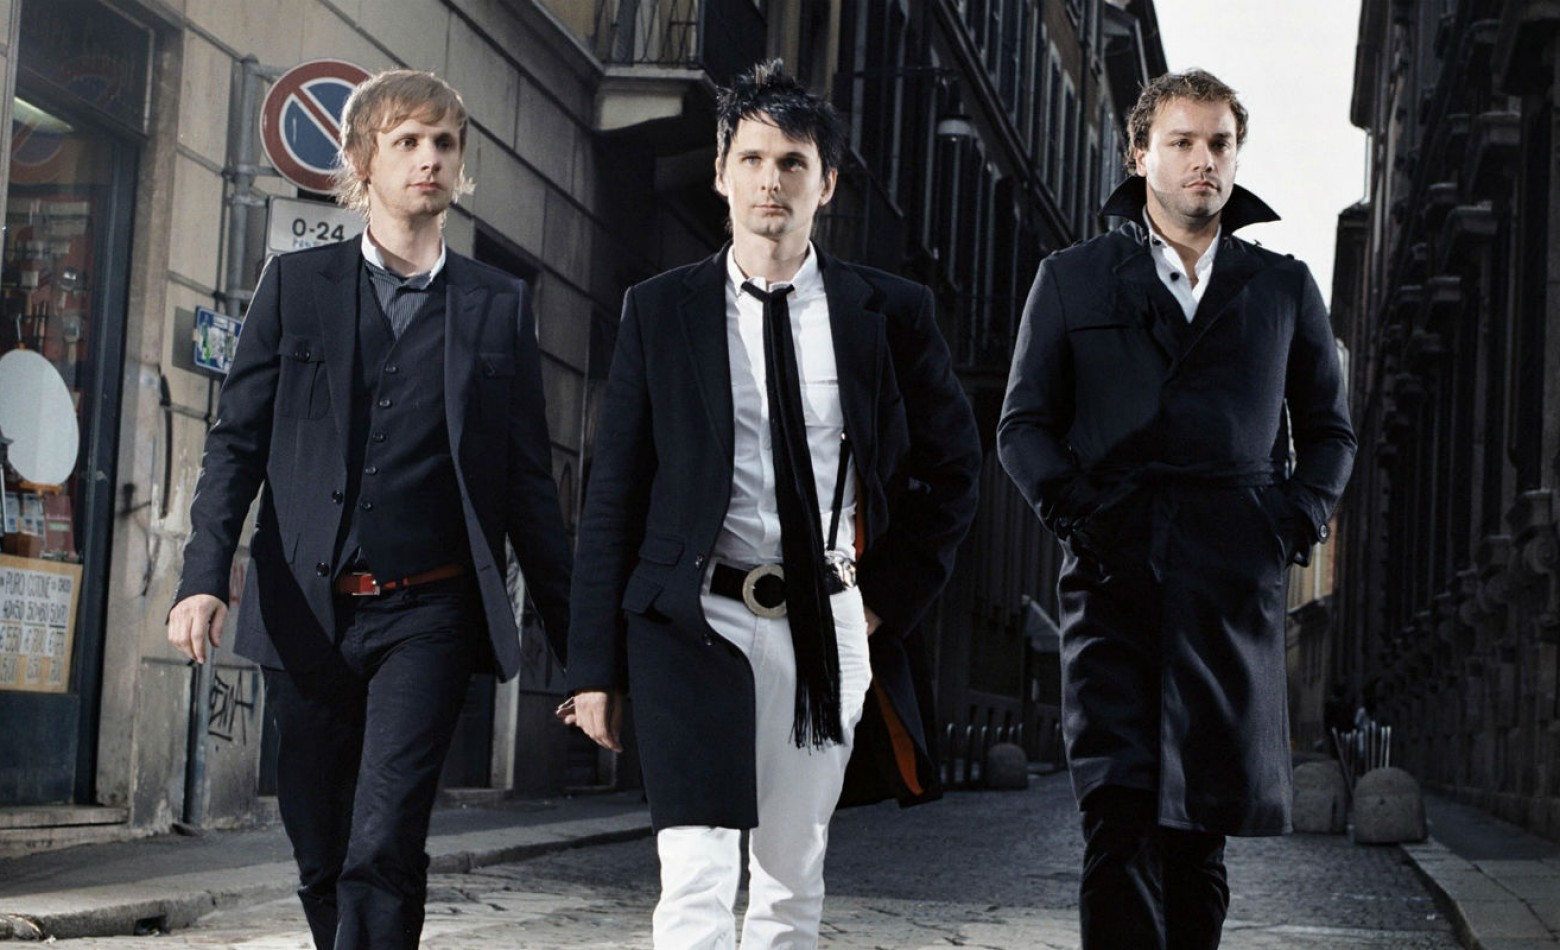 Top Gear + Muse = Bliss